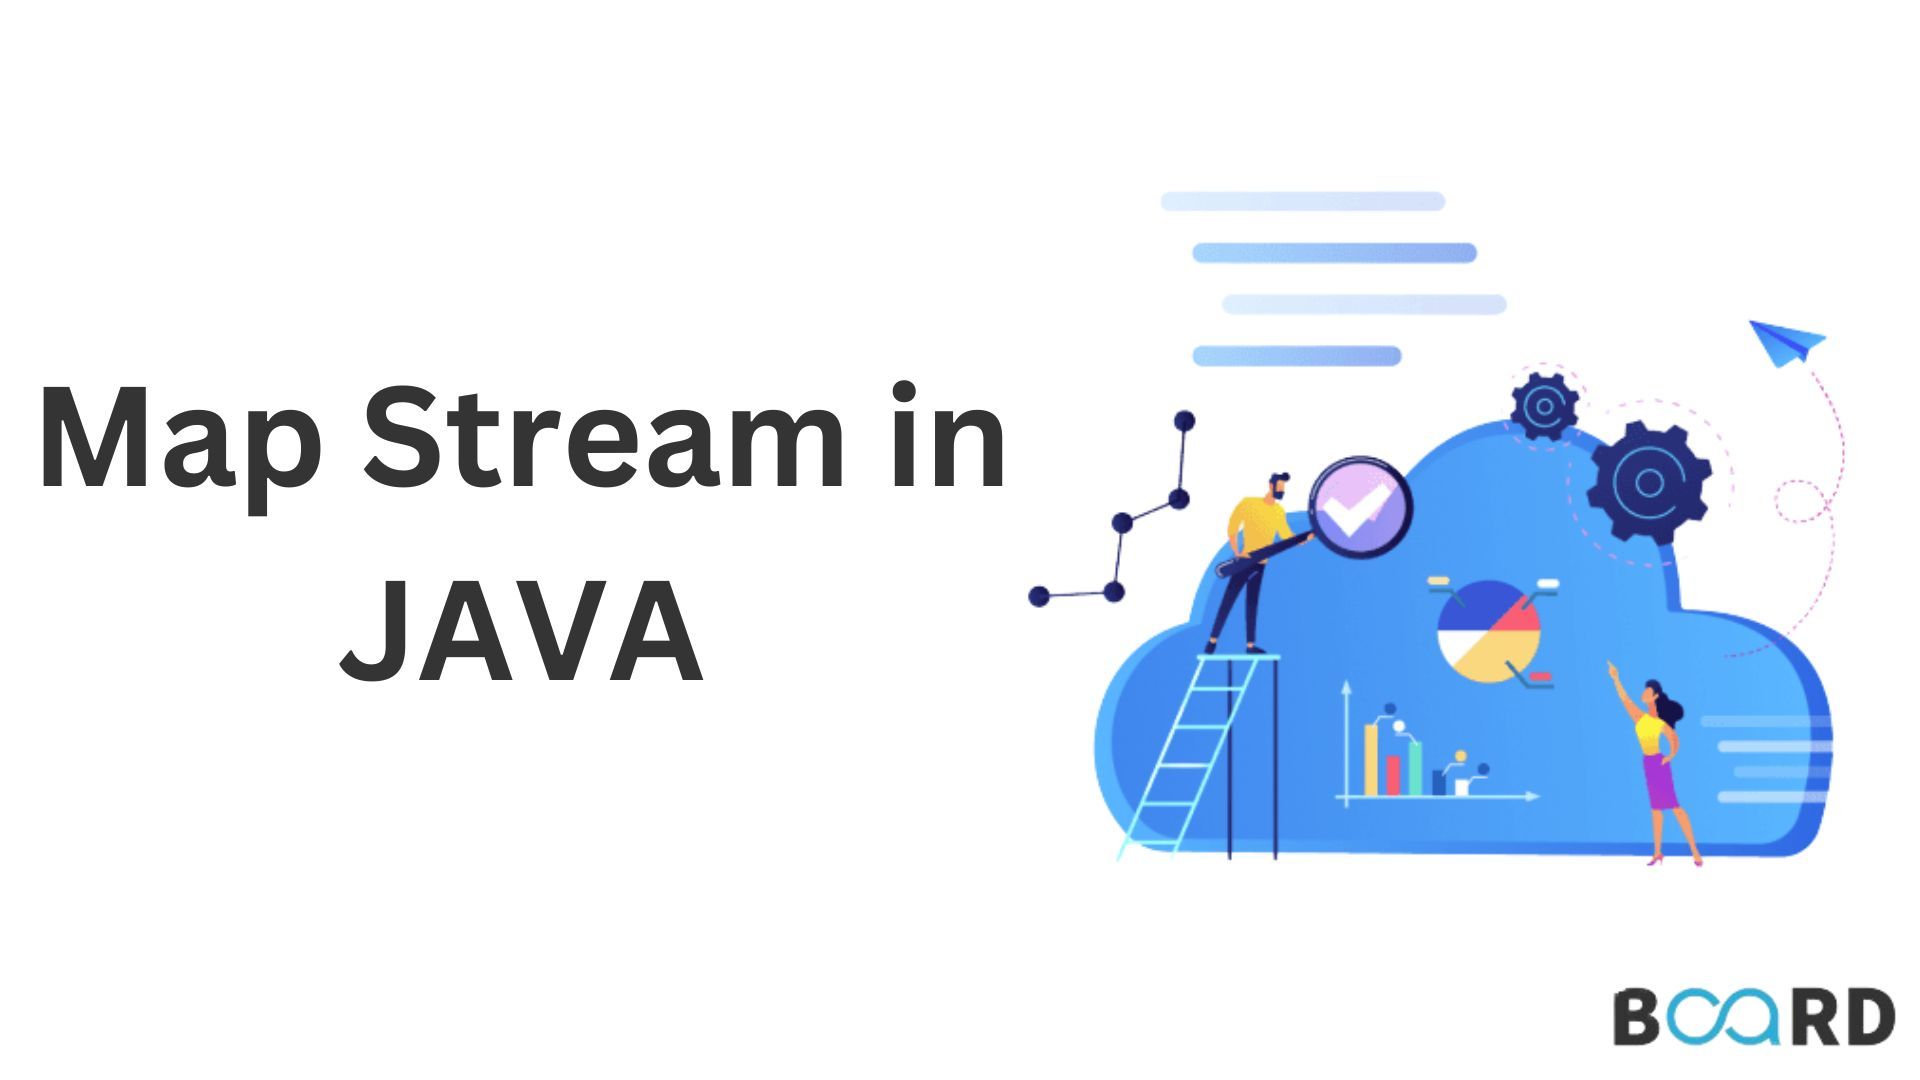 Learn about Map Stream in Java